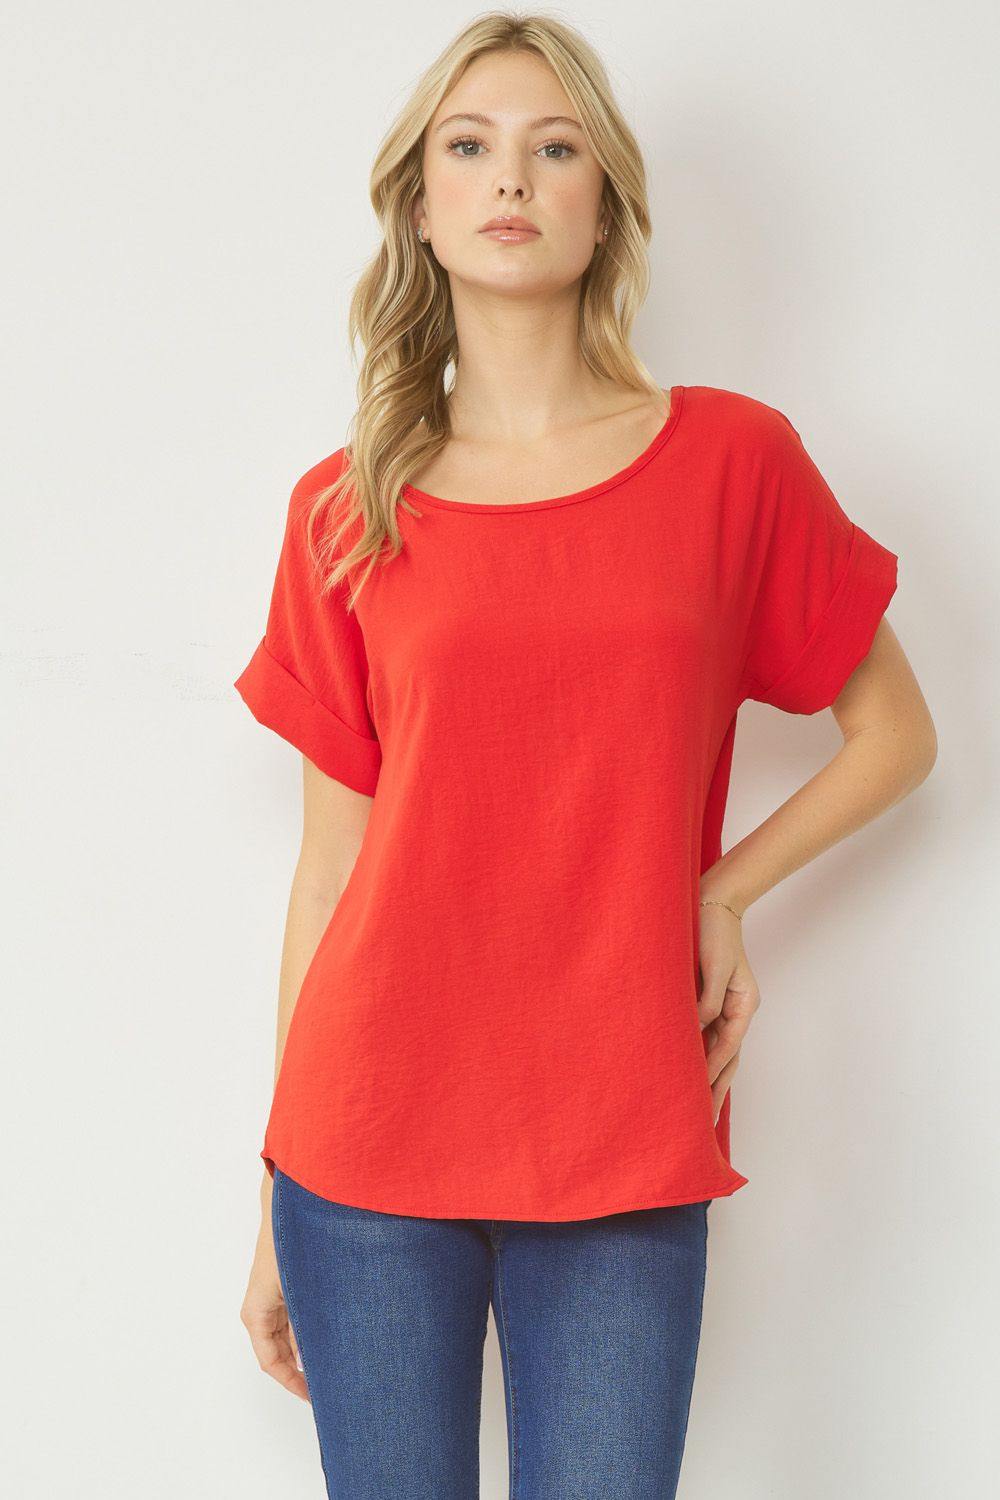 entro clothing brand boutique cuff sleeve scoop neck red